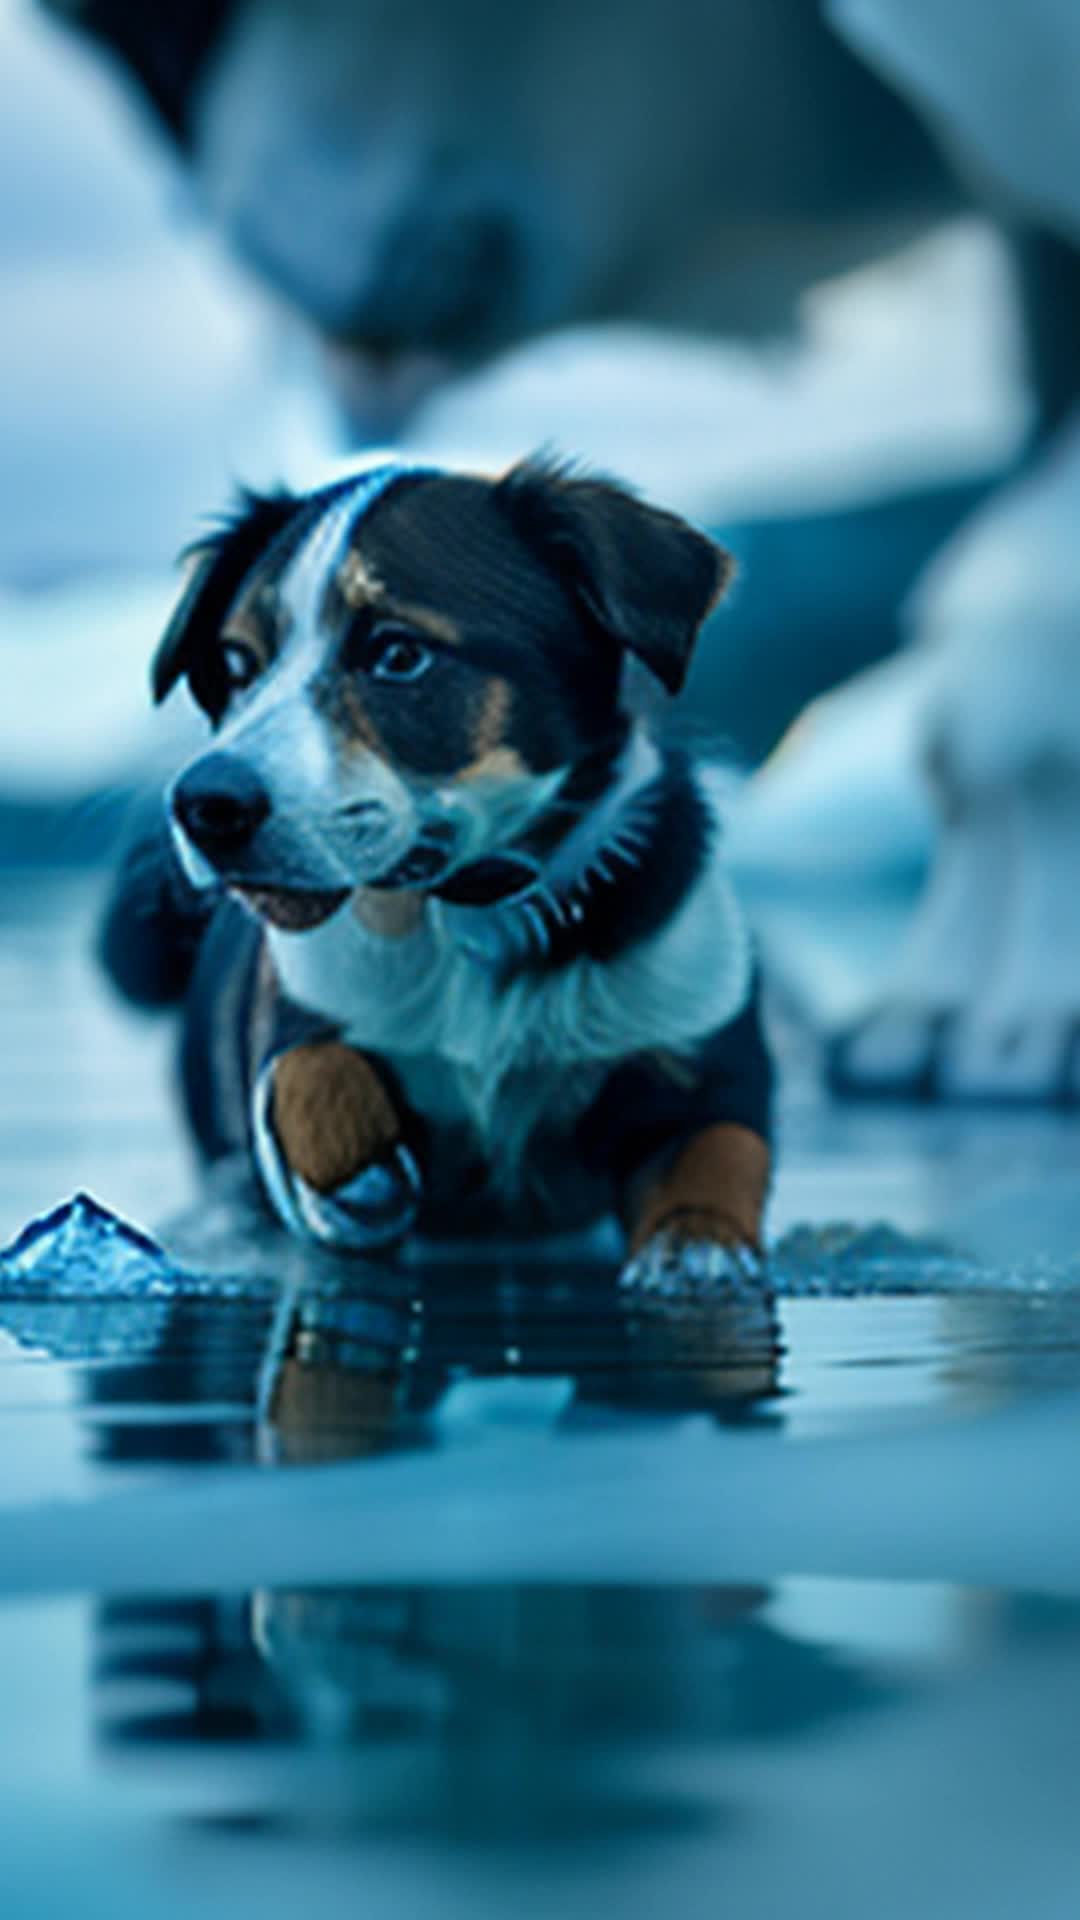 Barky, puppy, peers over ship's edge, Greenland icy shores, icy water splashes against hull, curious, attentive stance, cool blue and white tones, crisp, detailed texture of ice